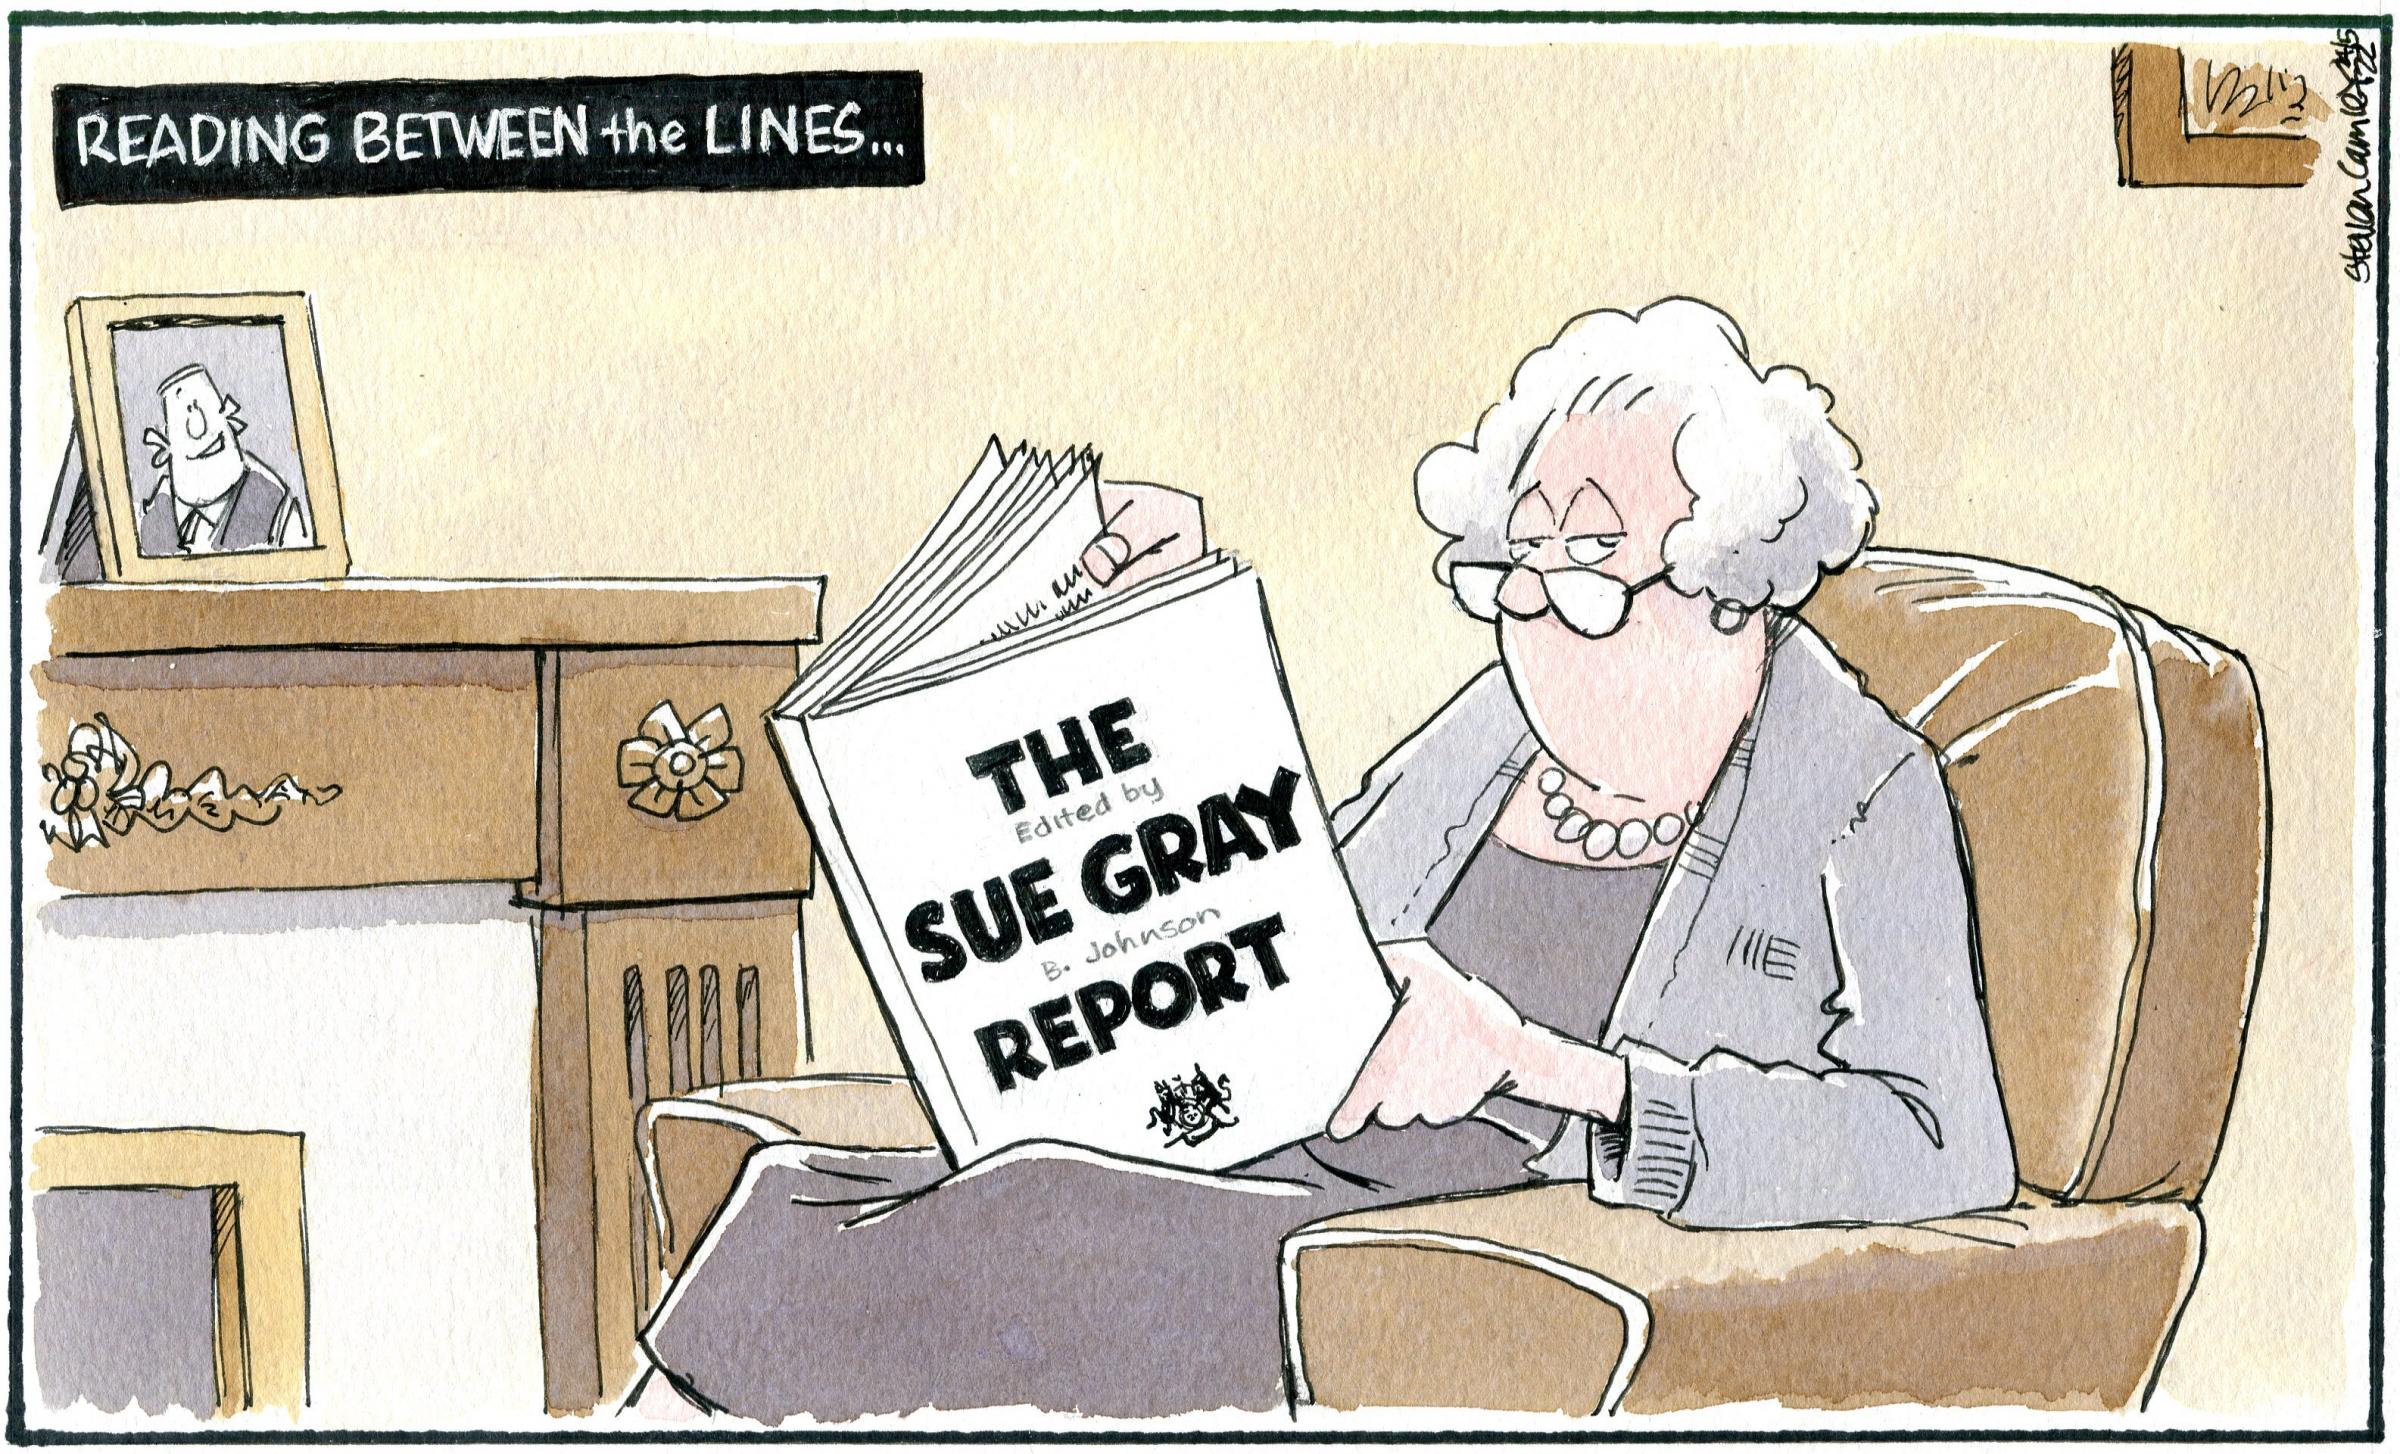 Our cartoonist Steven Camley’s take on the Sue Gray report